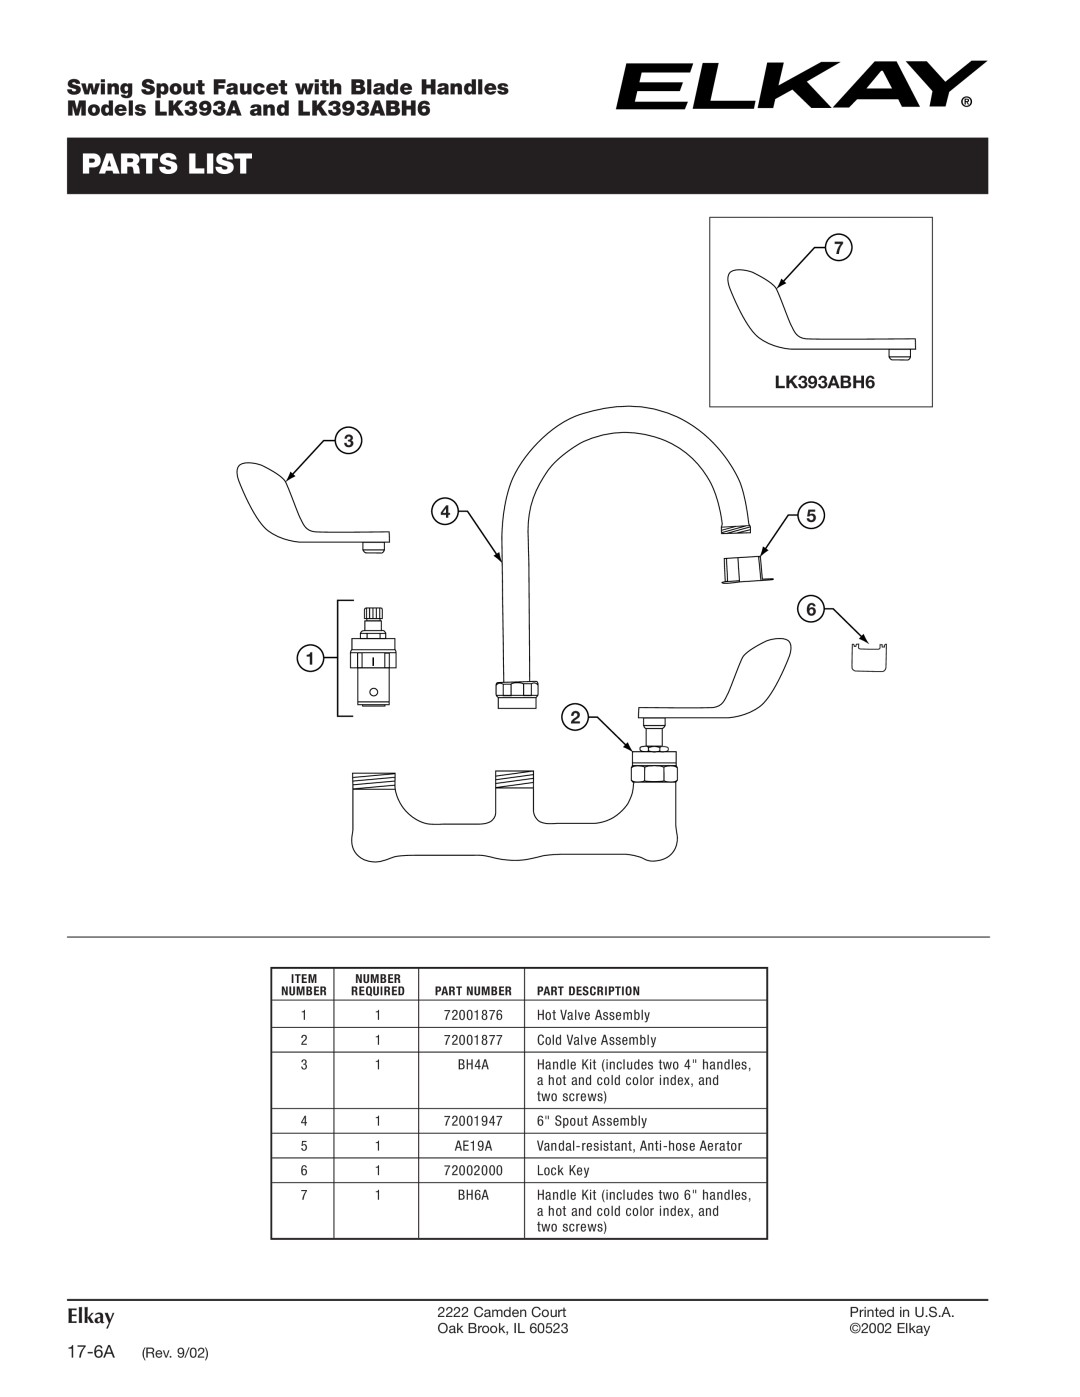 Elkay specifications Parts List, Swing Spout Faucet with Blade Handles, Models LK393A and LK393ABH6, Elkay 